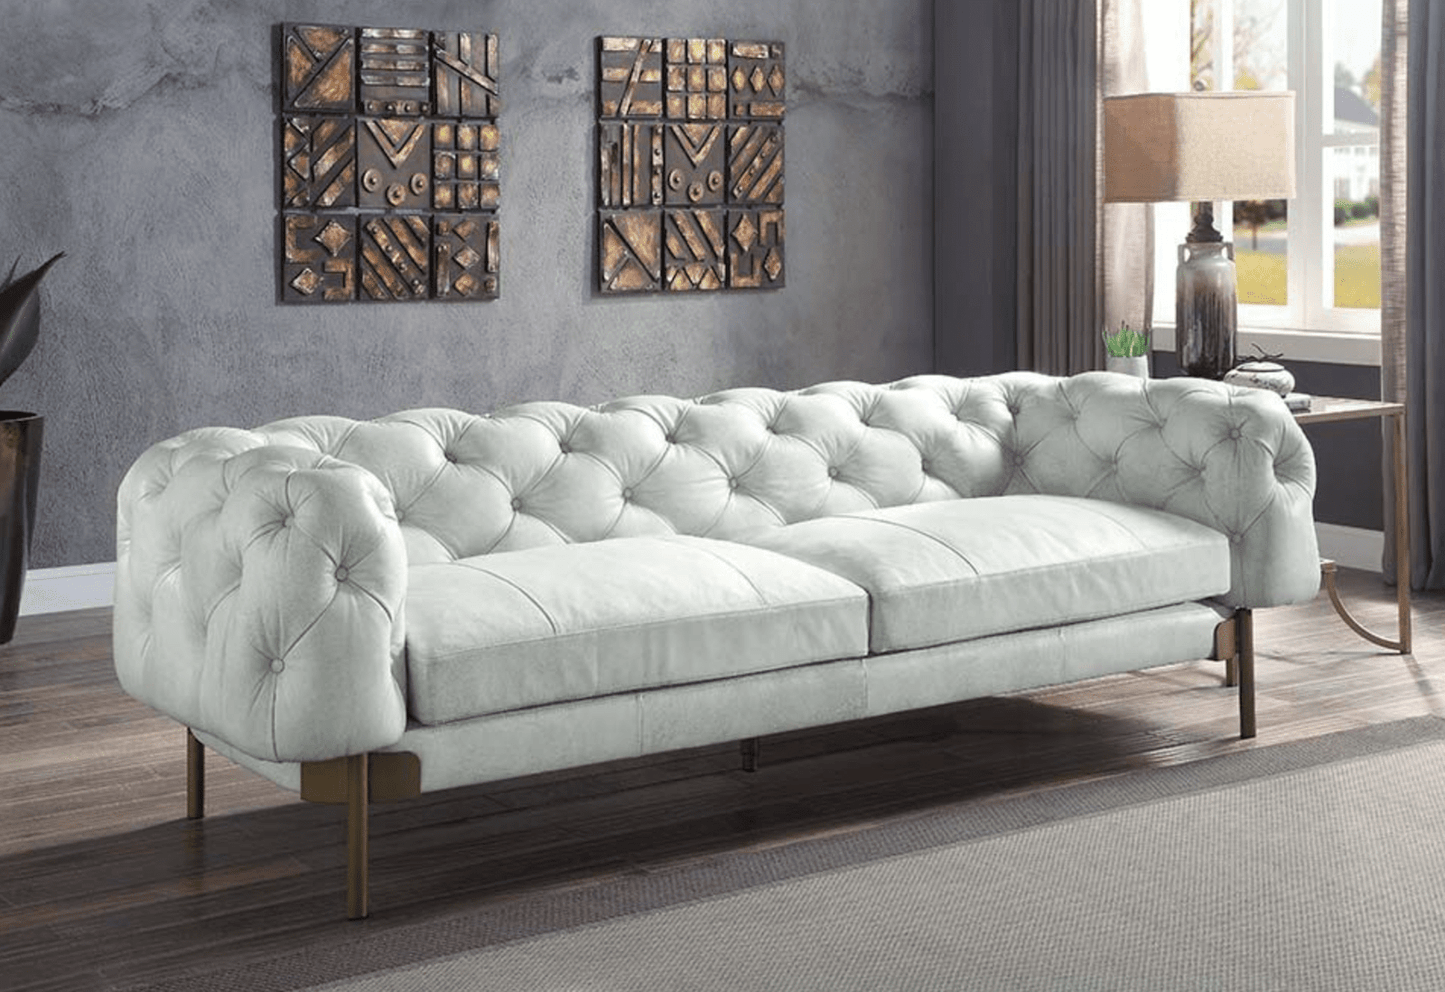 Ragle Modern Chesterfield Sofa in Vintage White Top Grain Leather